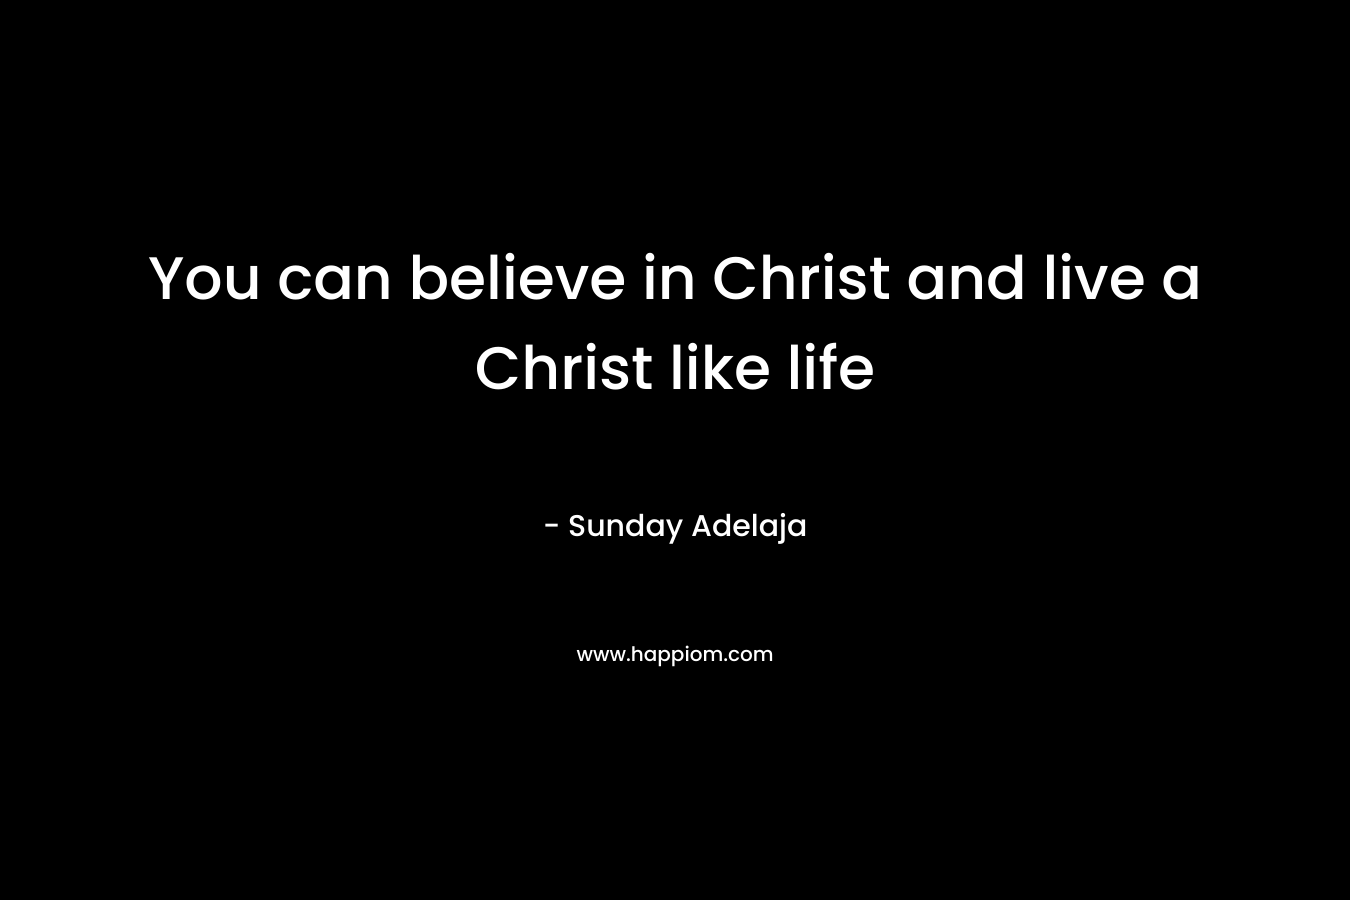 You can believe in Christ and live a Christ like life